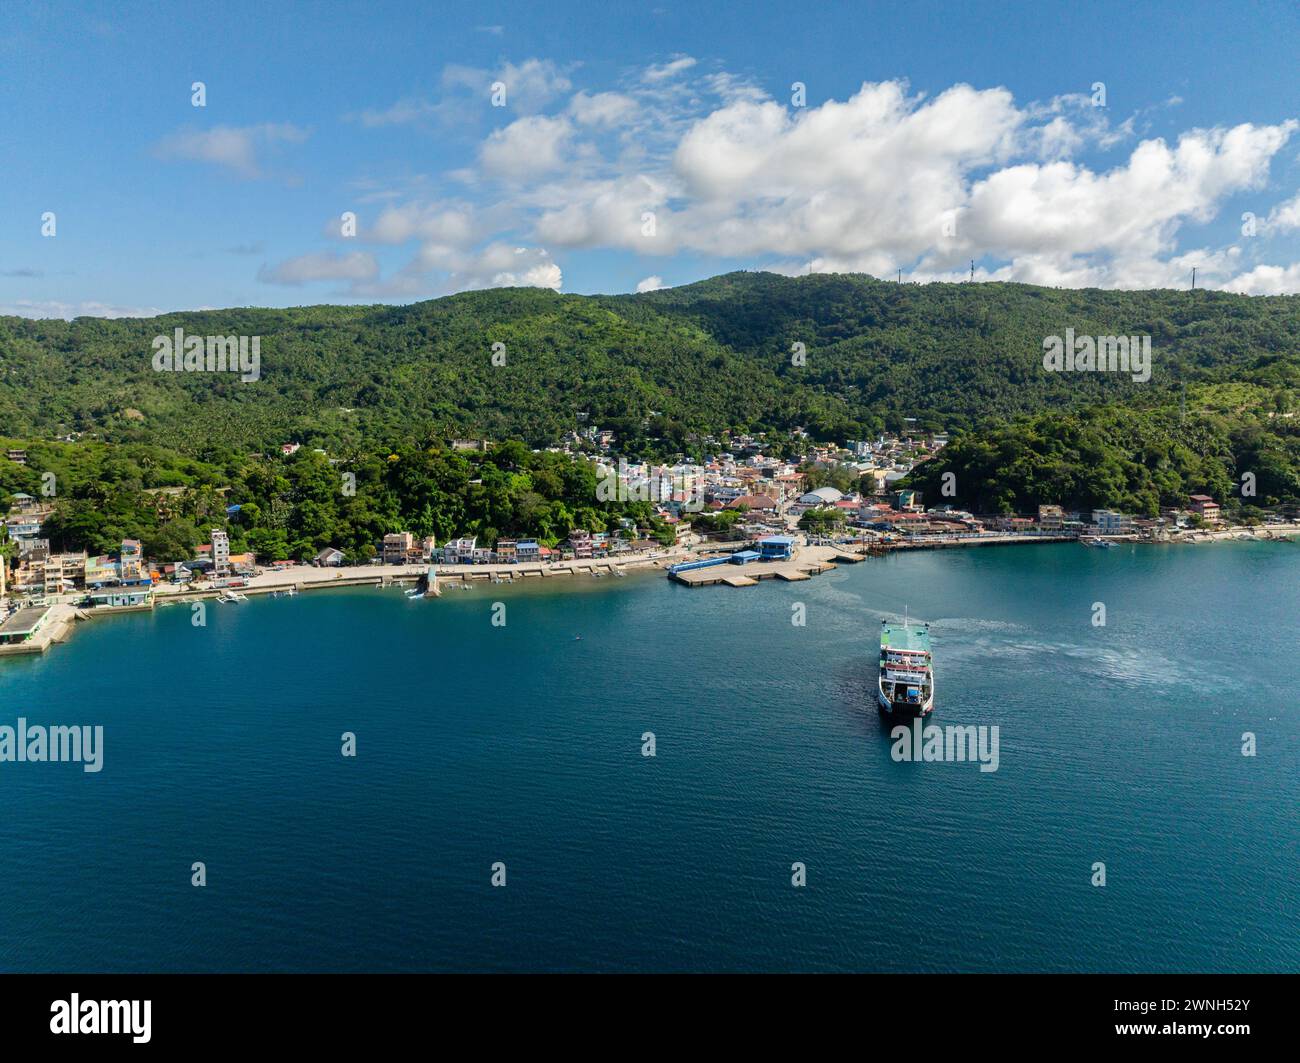 Coastline with port and city with houses. Ferry over the blue sea in Romblon Island. Romblon, Philippines. Stock Photo